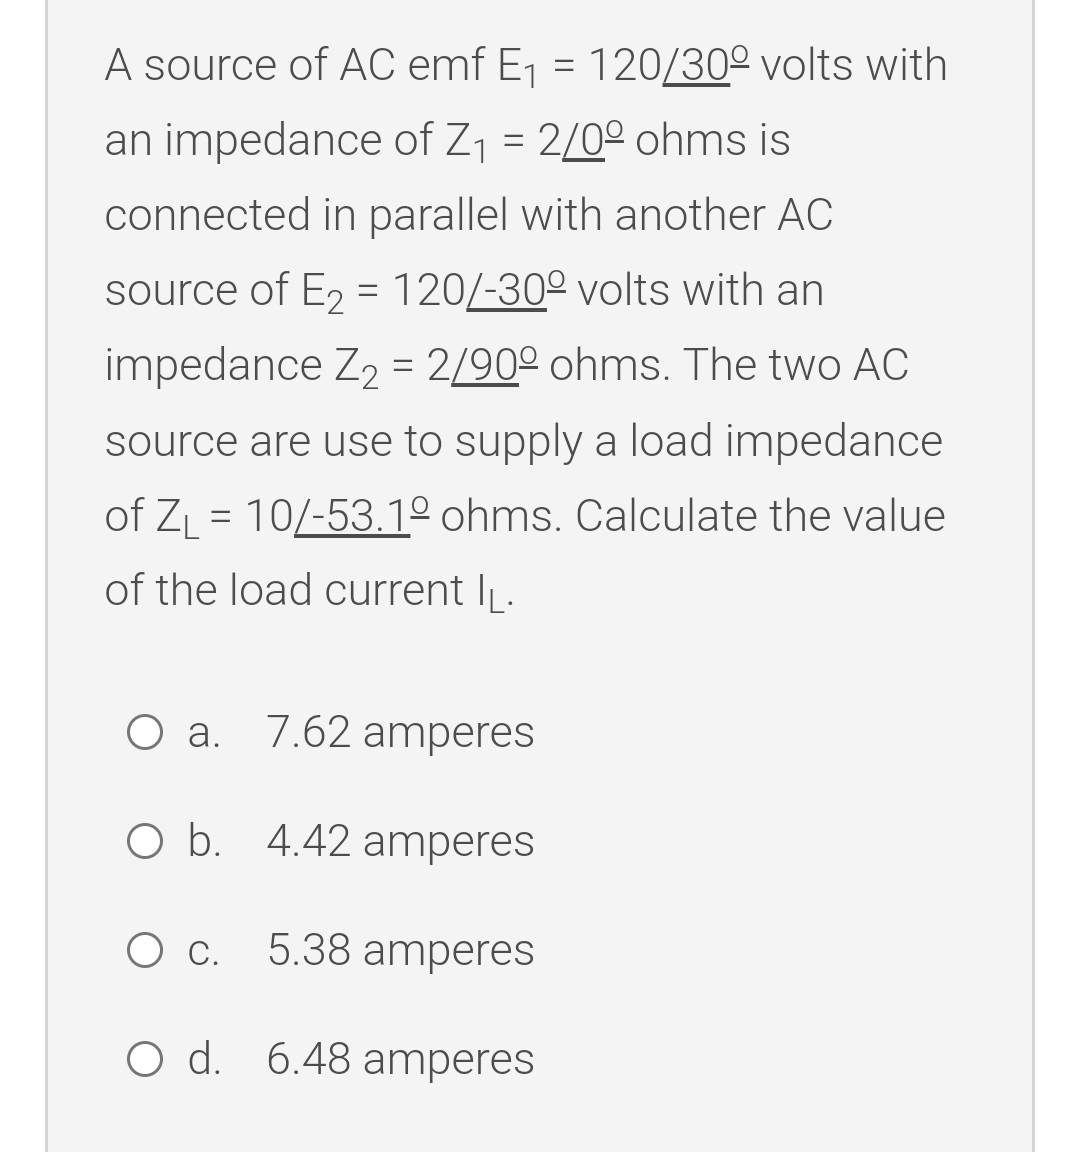 A source of AC emf E₁ = 120/300 volts with
an impedance of Z₁ = 2/0° ohms is
connected in parallel with another AC
source of E₂ = 120/-30º volts with an
impedance Z₂ = 2/90° ohms. The two AC
source are use to supply a load impedance
of Z₁ = 10/-53.10 ohms. Calculate the value
of the load current IL.
O a. 7.62 amperes
O b. 4.42 amperes
O C.
5.38 amperes
O d. 6.48 amperes